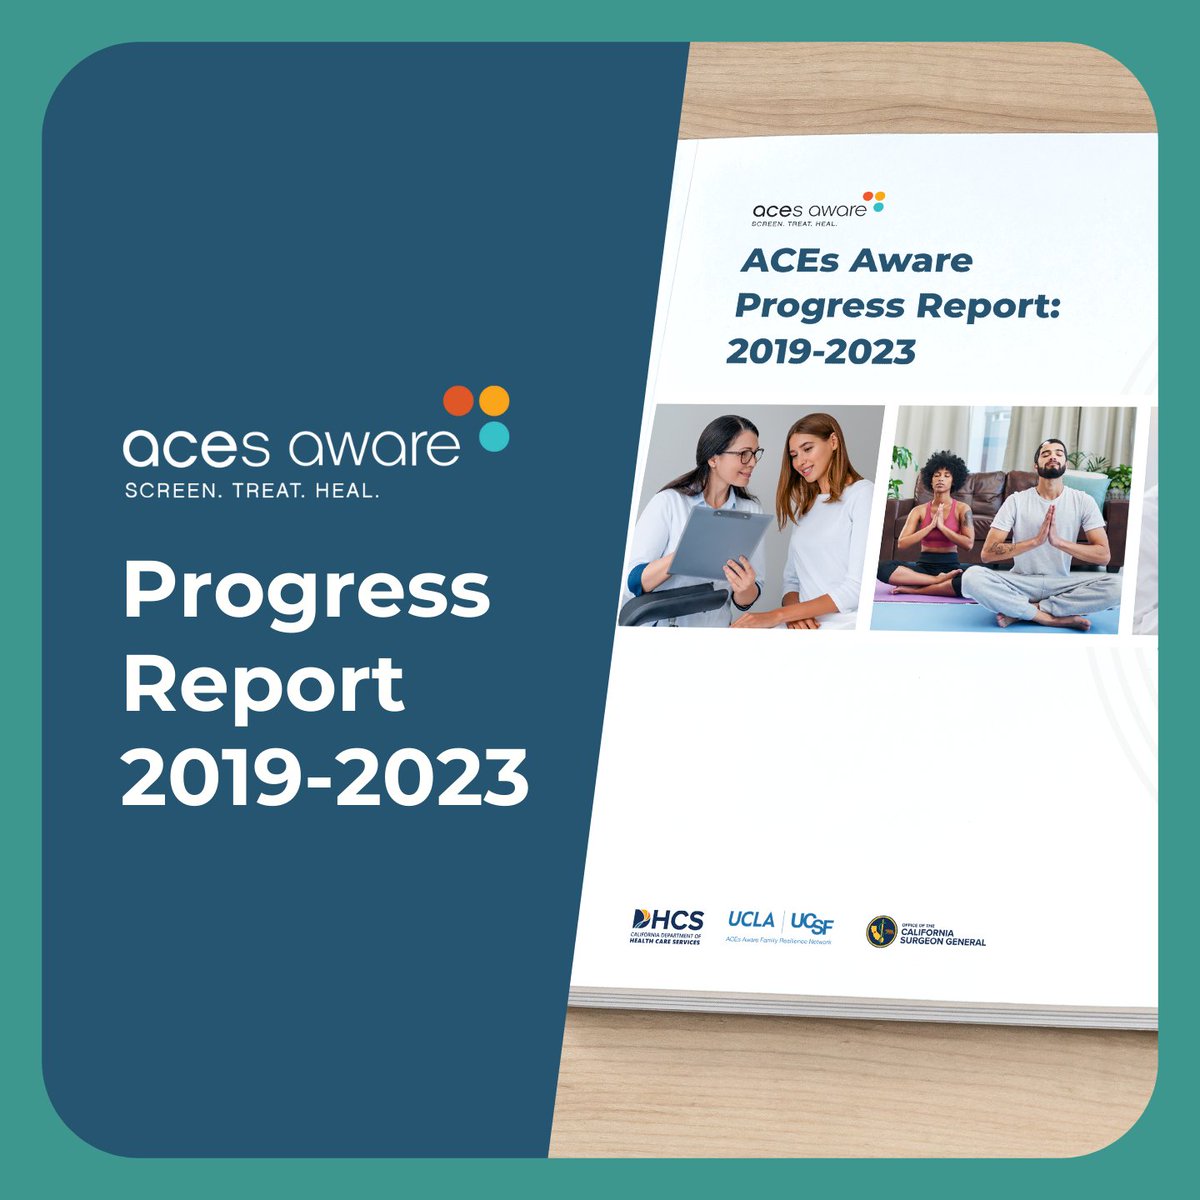 Learn more about the ACEs Aware initiative, the significant progress and impact we’ve made in our first four years, and the work that's on the way.   Read the ACEs Aware Progress Report: 2019-2023 today.  bit.ly/3JWzzHV